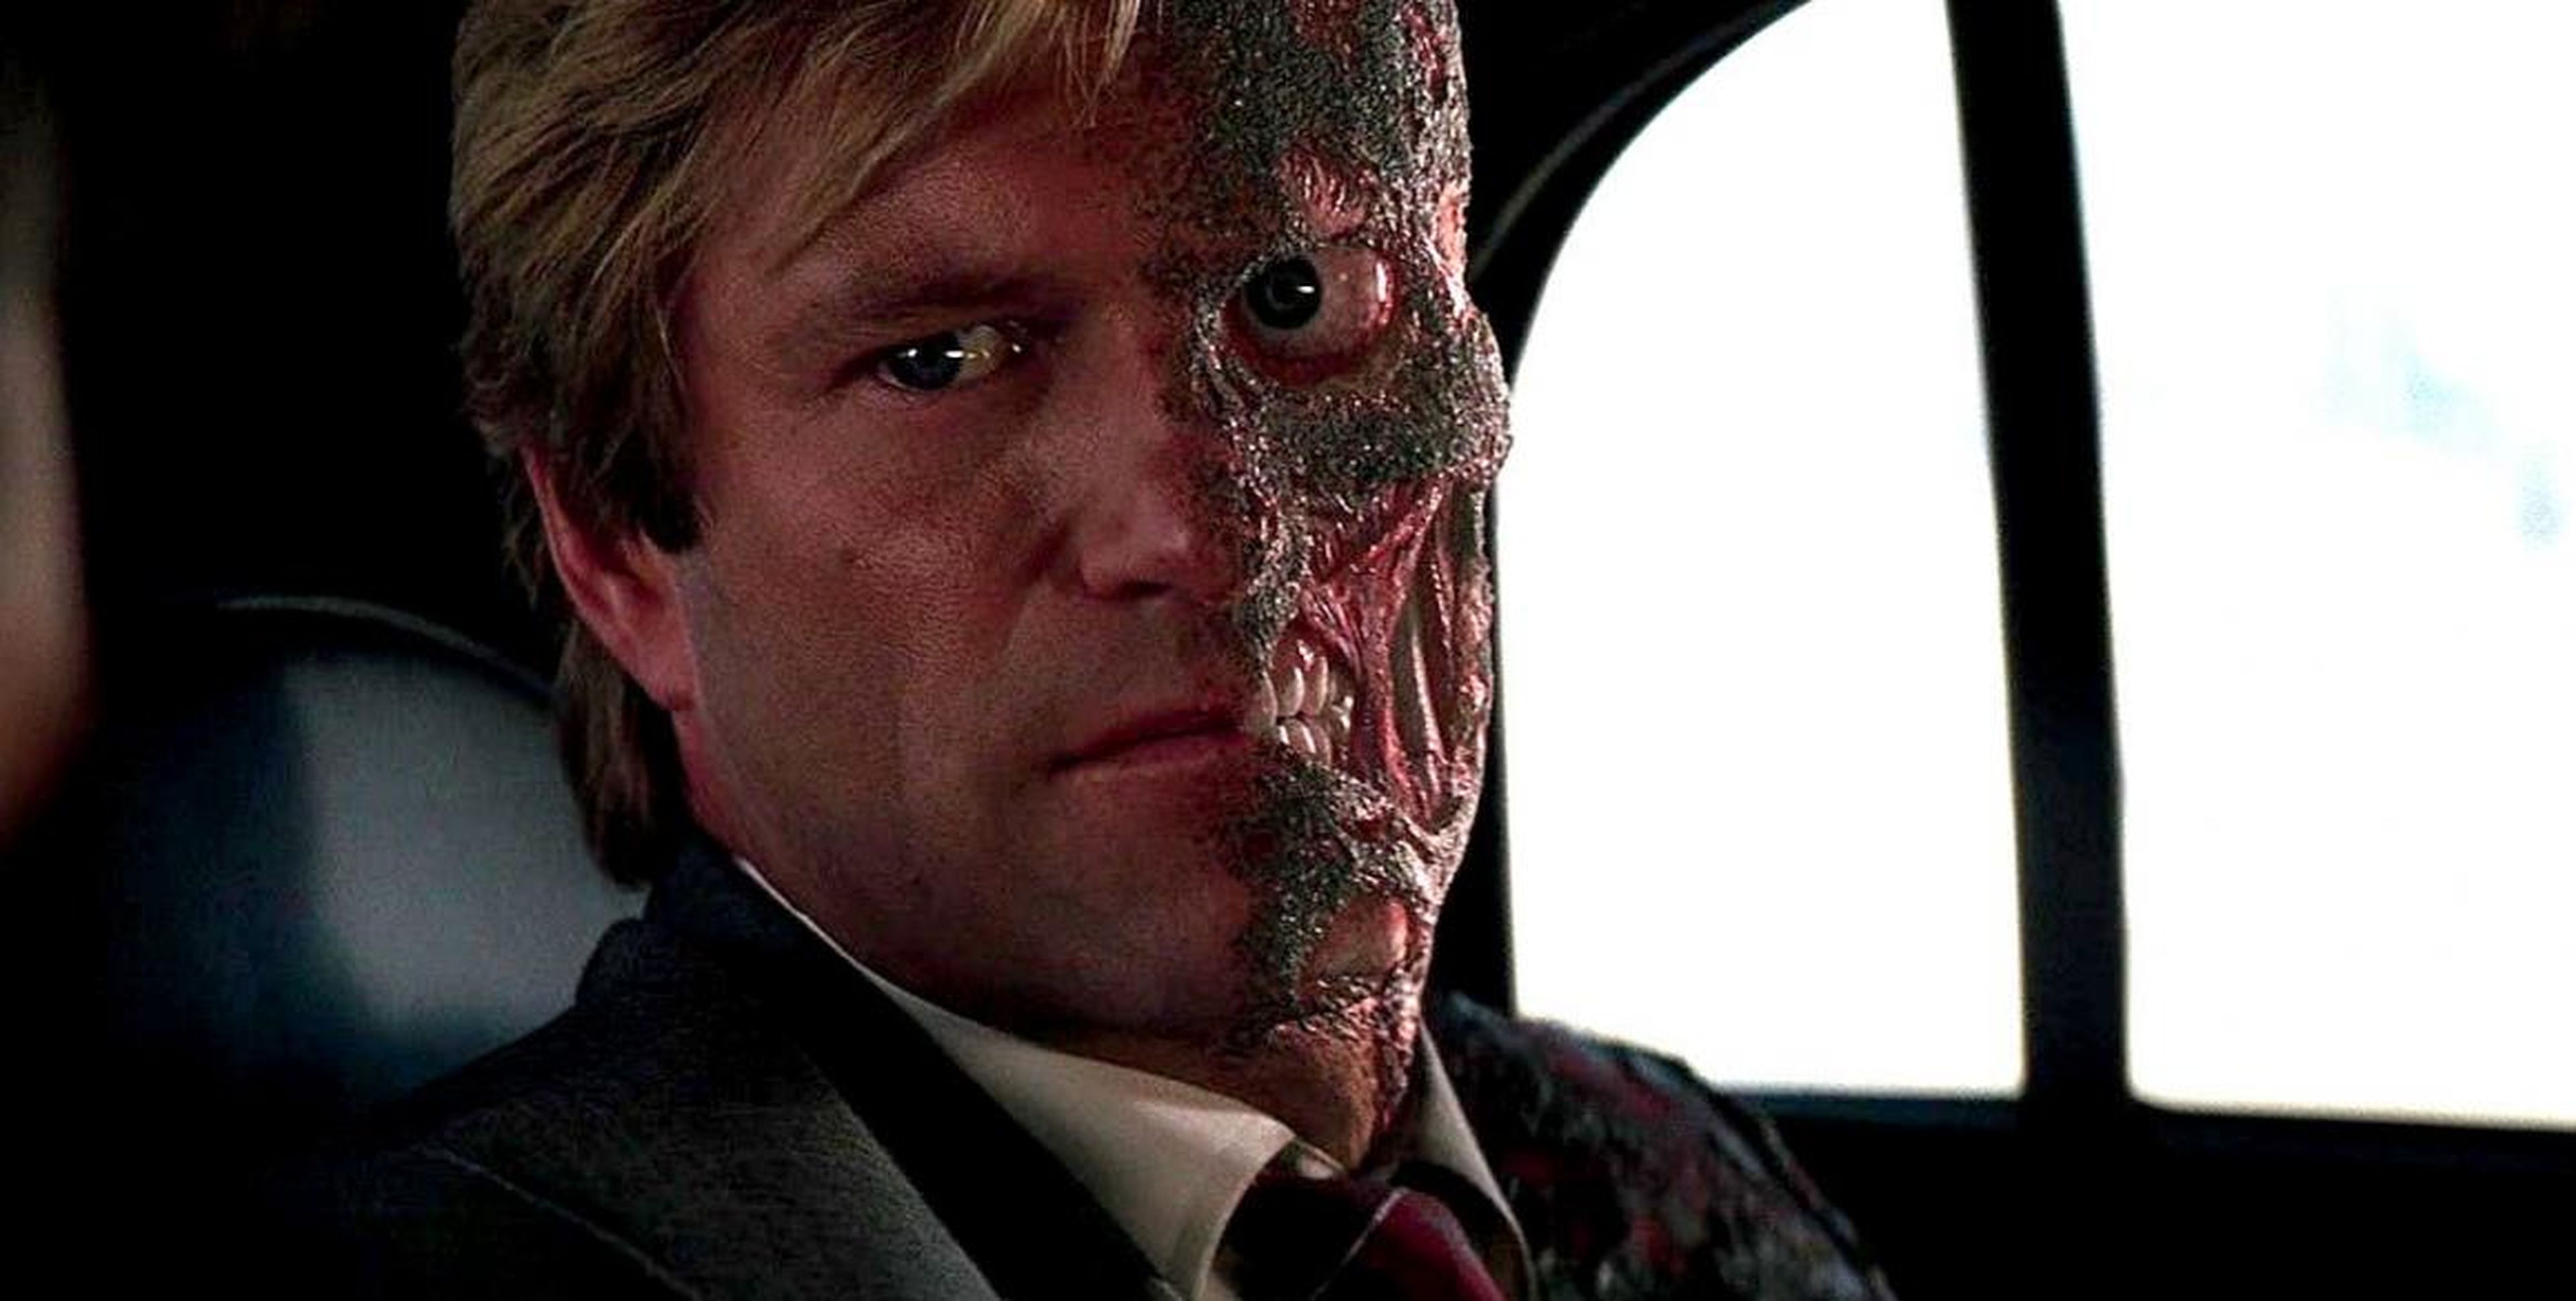 19. Aaron Eckhart as Harvey Dent/Two-Face in "The Dark Knight" (2008)